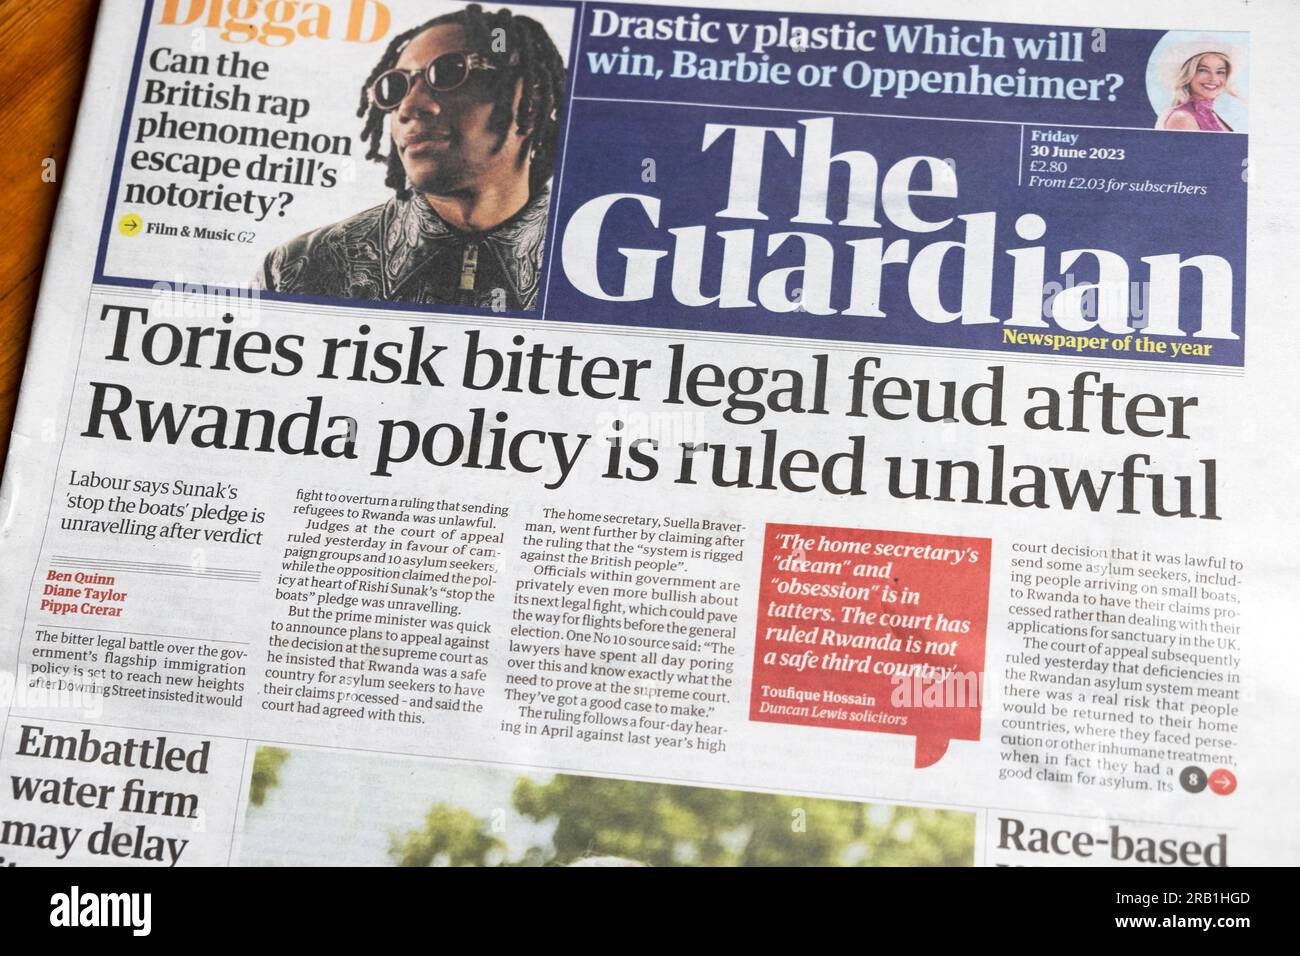 "Tories Risk Bitter Legal feud after Rwanda policy is ruled Unlawful" Guardian Newspaper headline front page articolo 30 giugno 2023 Londra Inghilterra Regno Unito Foto Stock